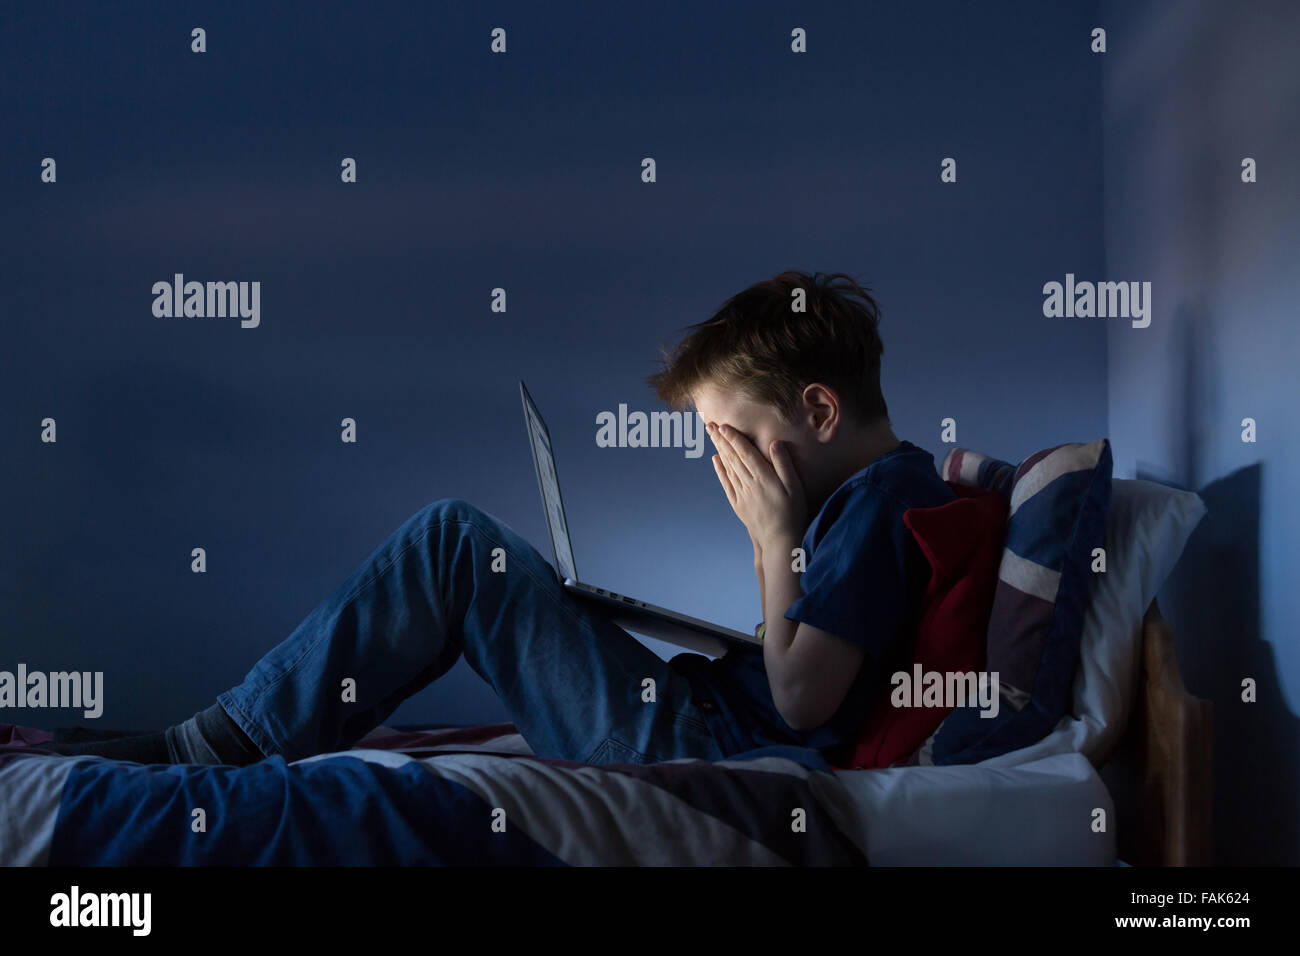 Online bullying Cyber bullying photo of an upset boy in his bedroom looking at hurtful messages on social media Stock Photo